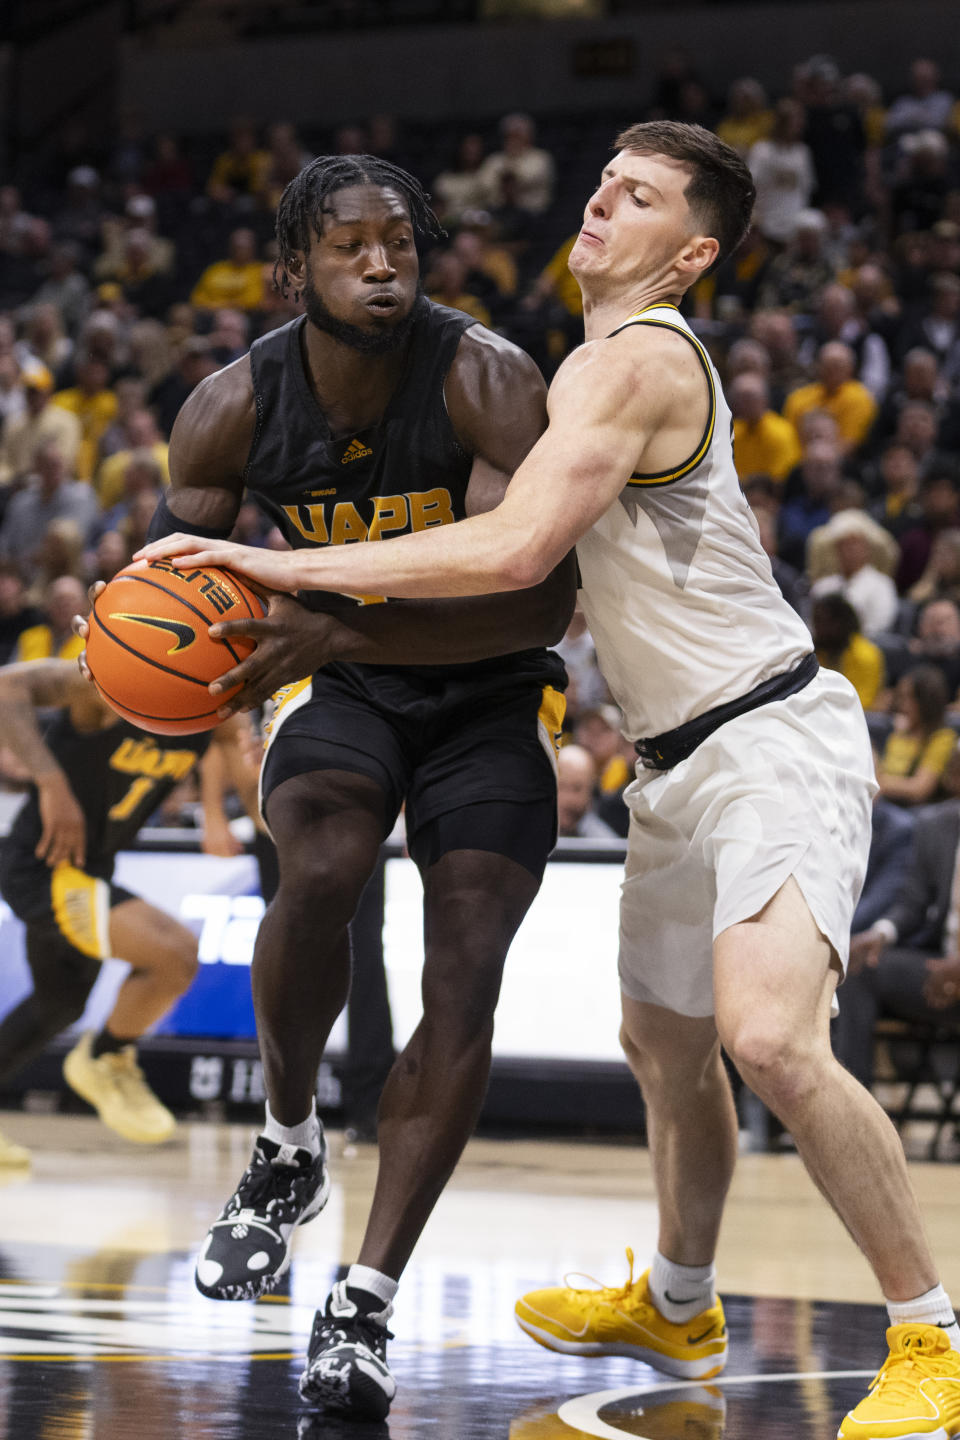 Missouri forward Jesus Carralero Martin, right, knocks the ball from Arkansas-Pine Bluff's Ismael Plet, left, during the first half of an NCAA college basketball game Monday, Nov. 6, 2023, in Columbia, Mo. (AP Photo/L.G. Patterson)